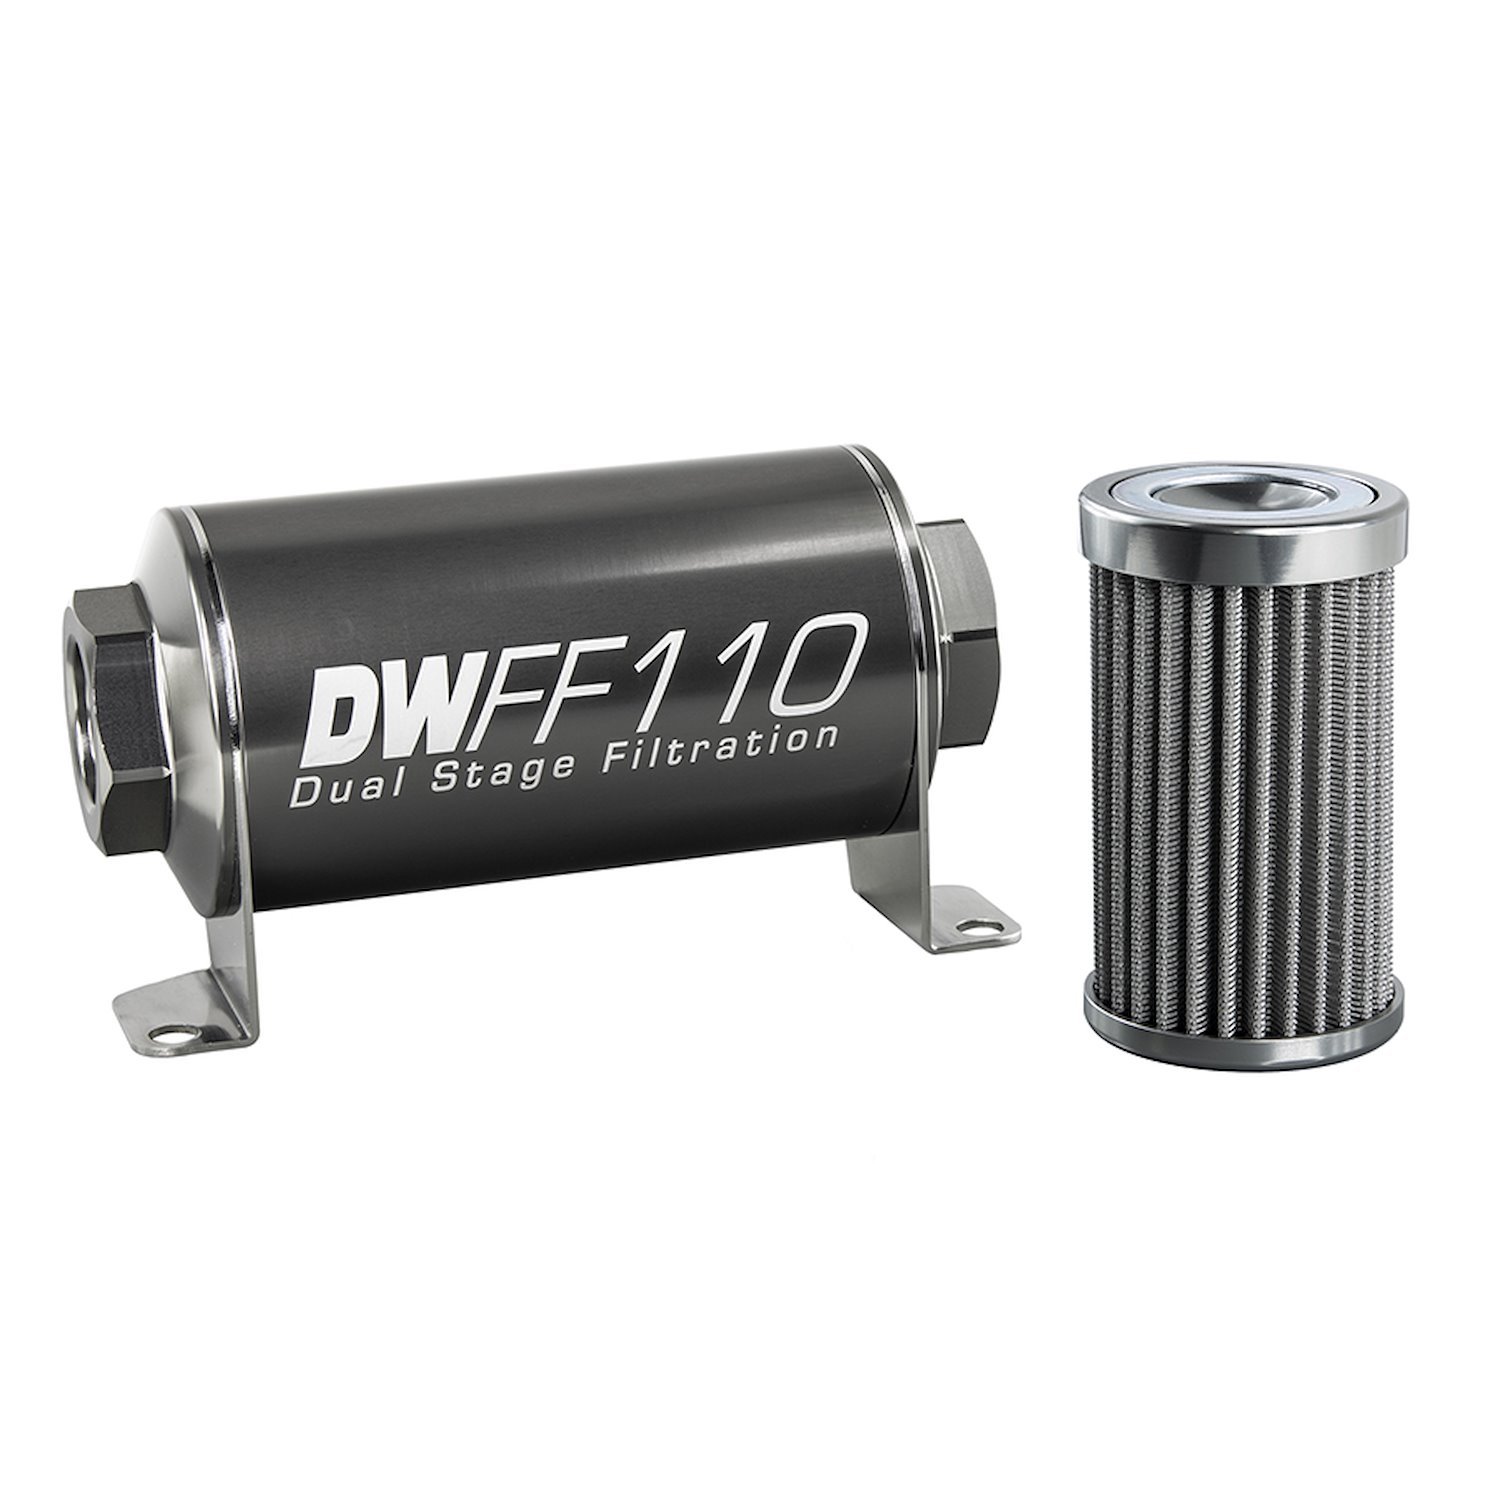 803110100K In-line fuel filter element and housing kit stainless steel 100 micron -10AN 110mm. Universal